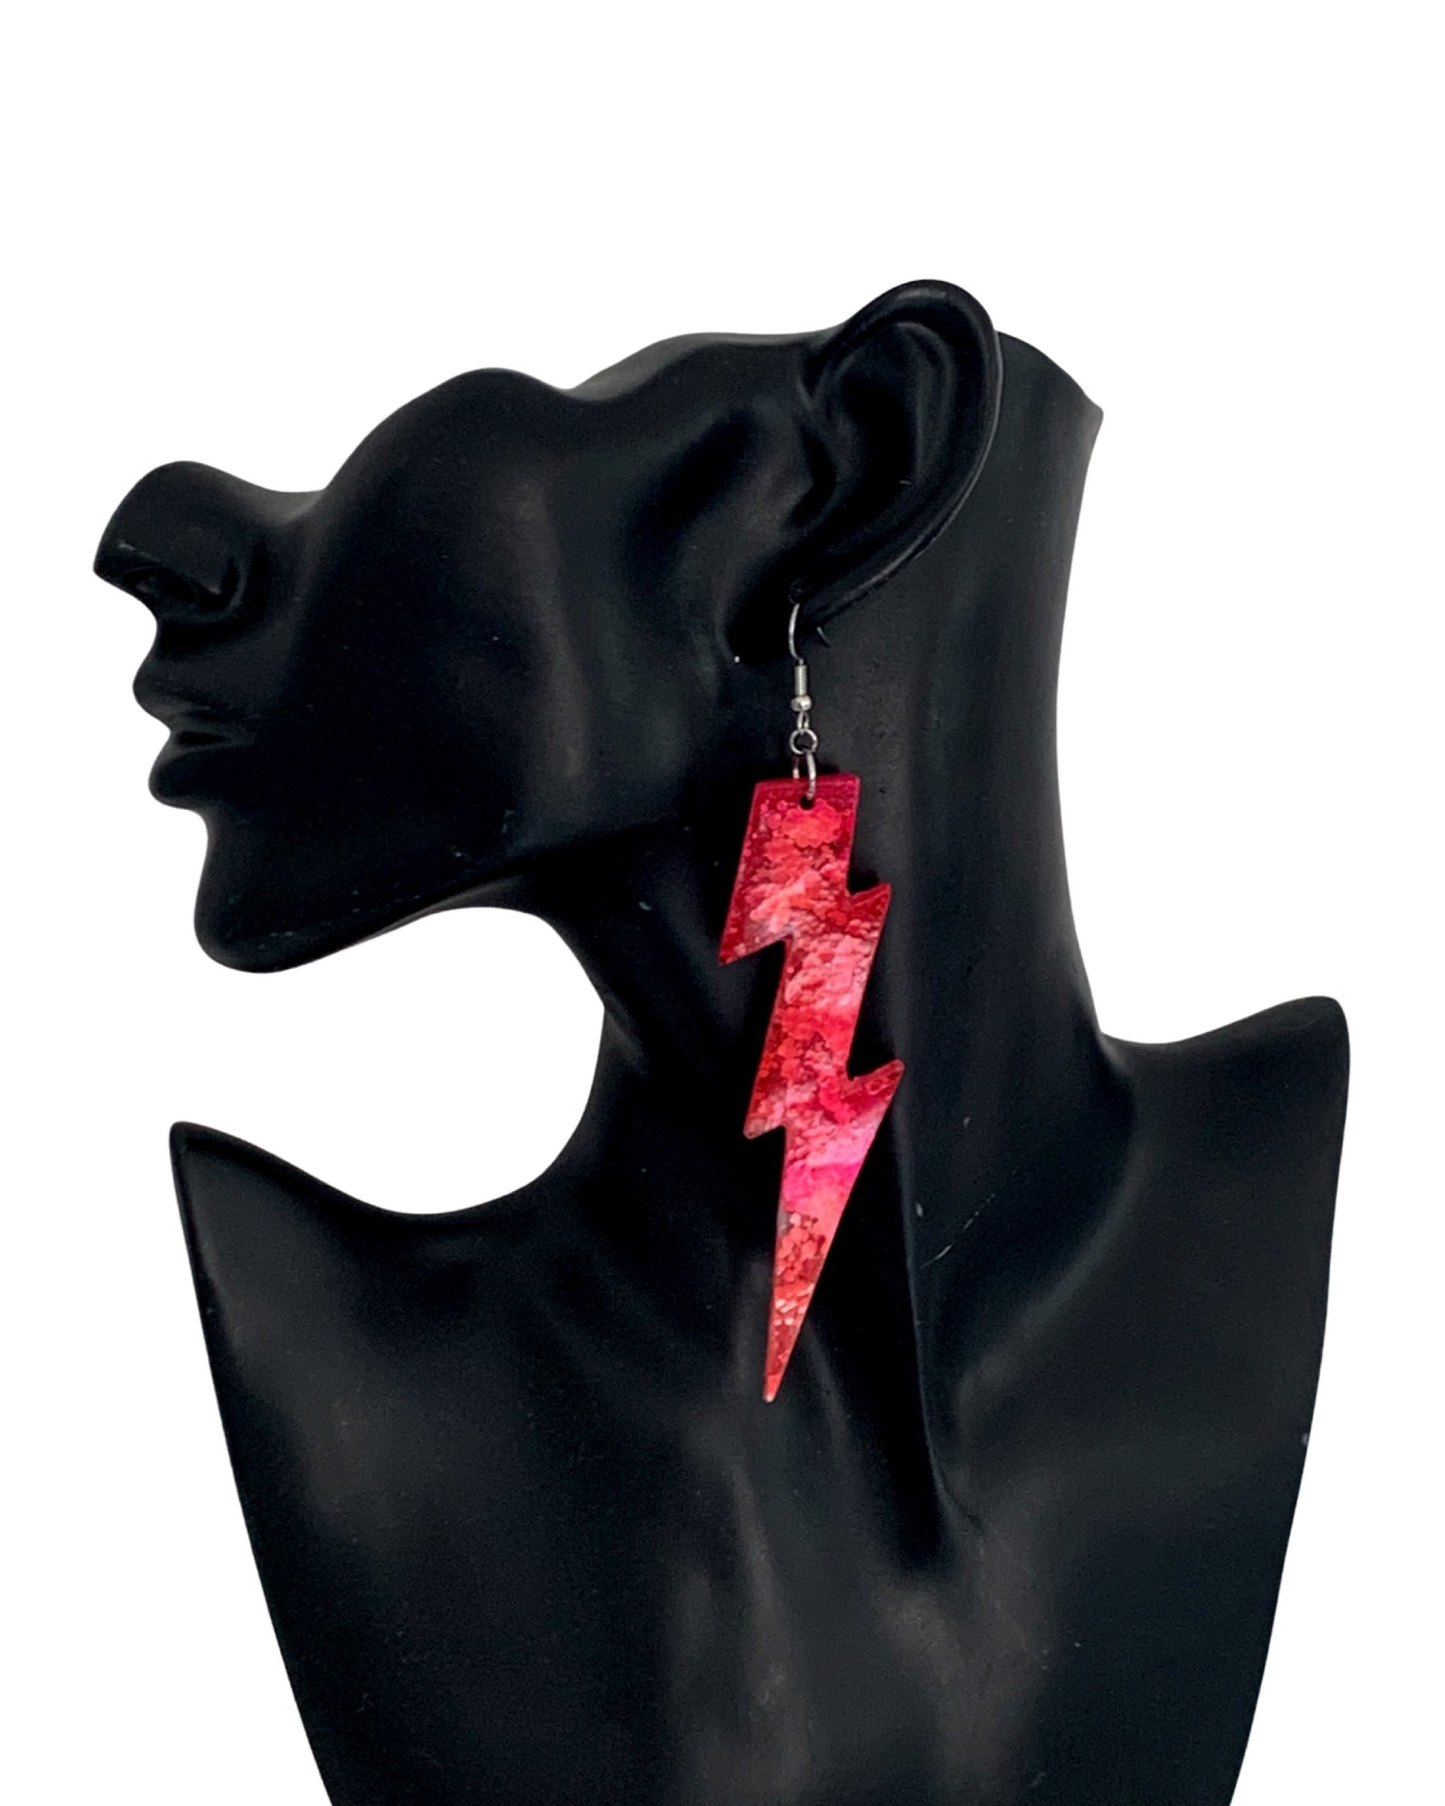 Pink and Red Lightning Bolt Earrings, 4” statement earrings - Discontinued